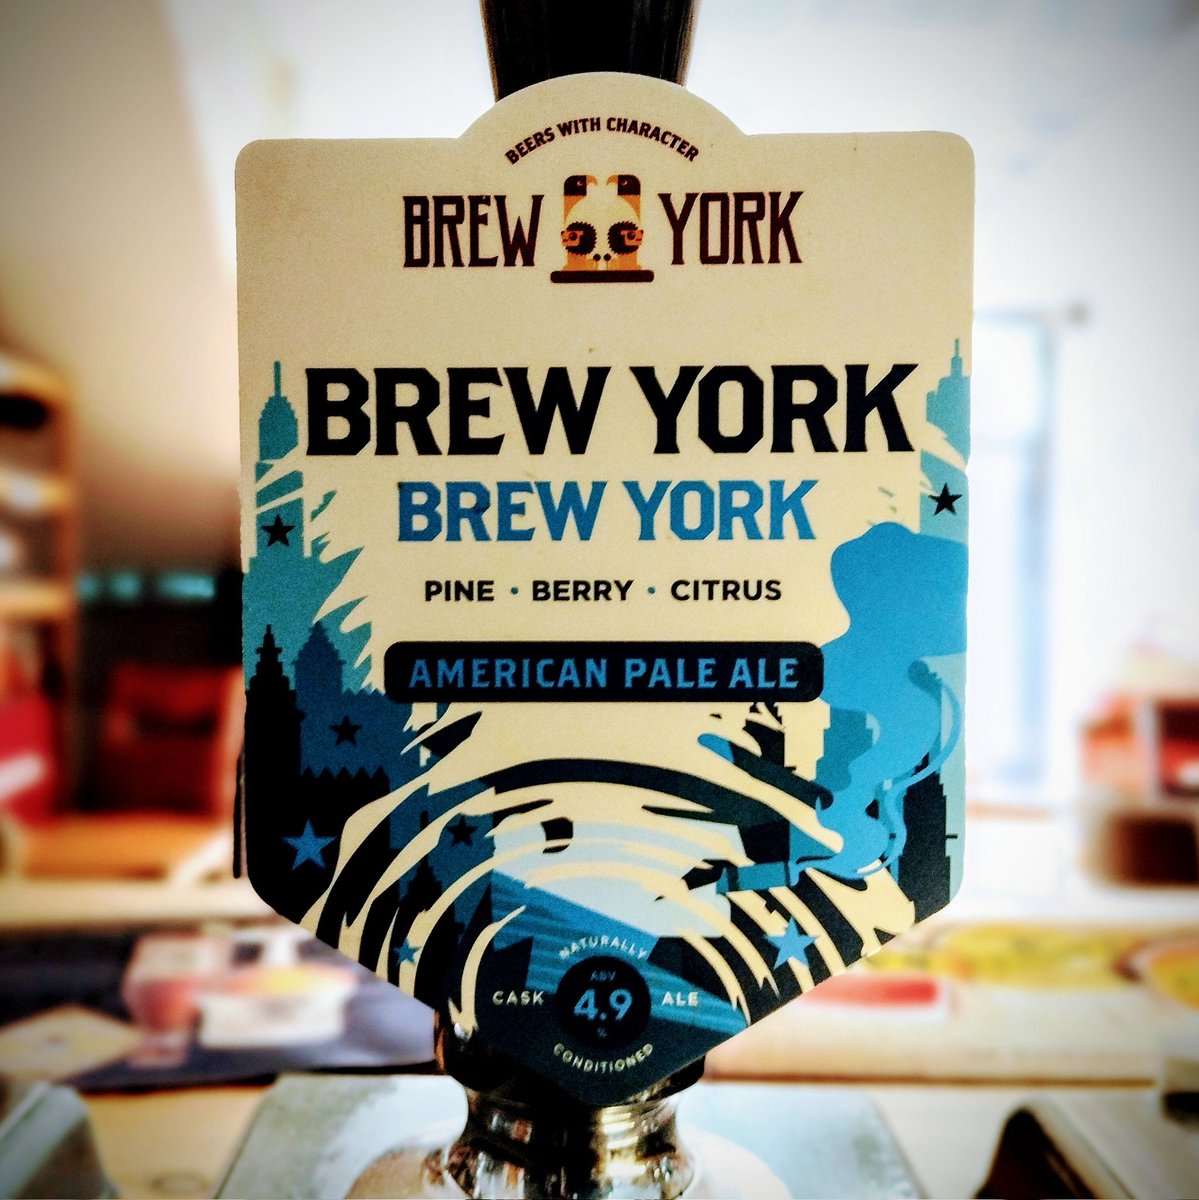 We're back! 4pm to 10pm with two fresh casks.... A hoppy, fruity APA - an overdue return for the first Brew York cask we had about 6 years ago! And a light, citrussy and thirst quenching blonde from Newtown's Wilderness Brewery. See you after work 👍 #colwynbay #alehouse #pub